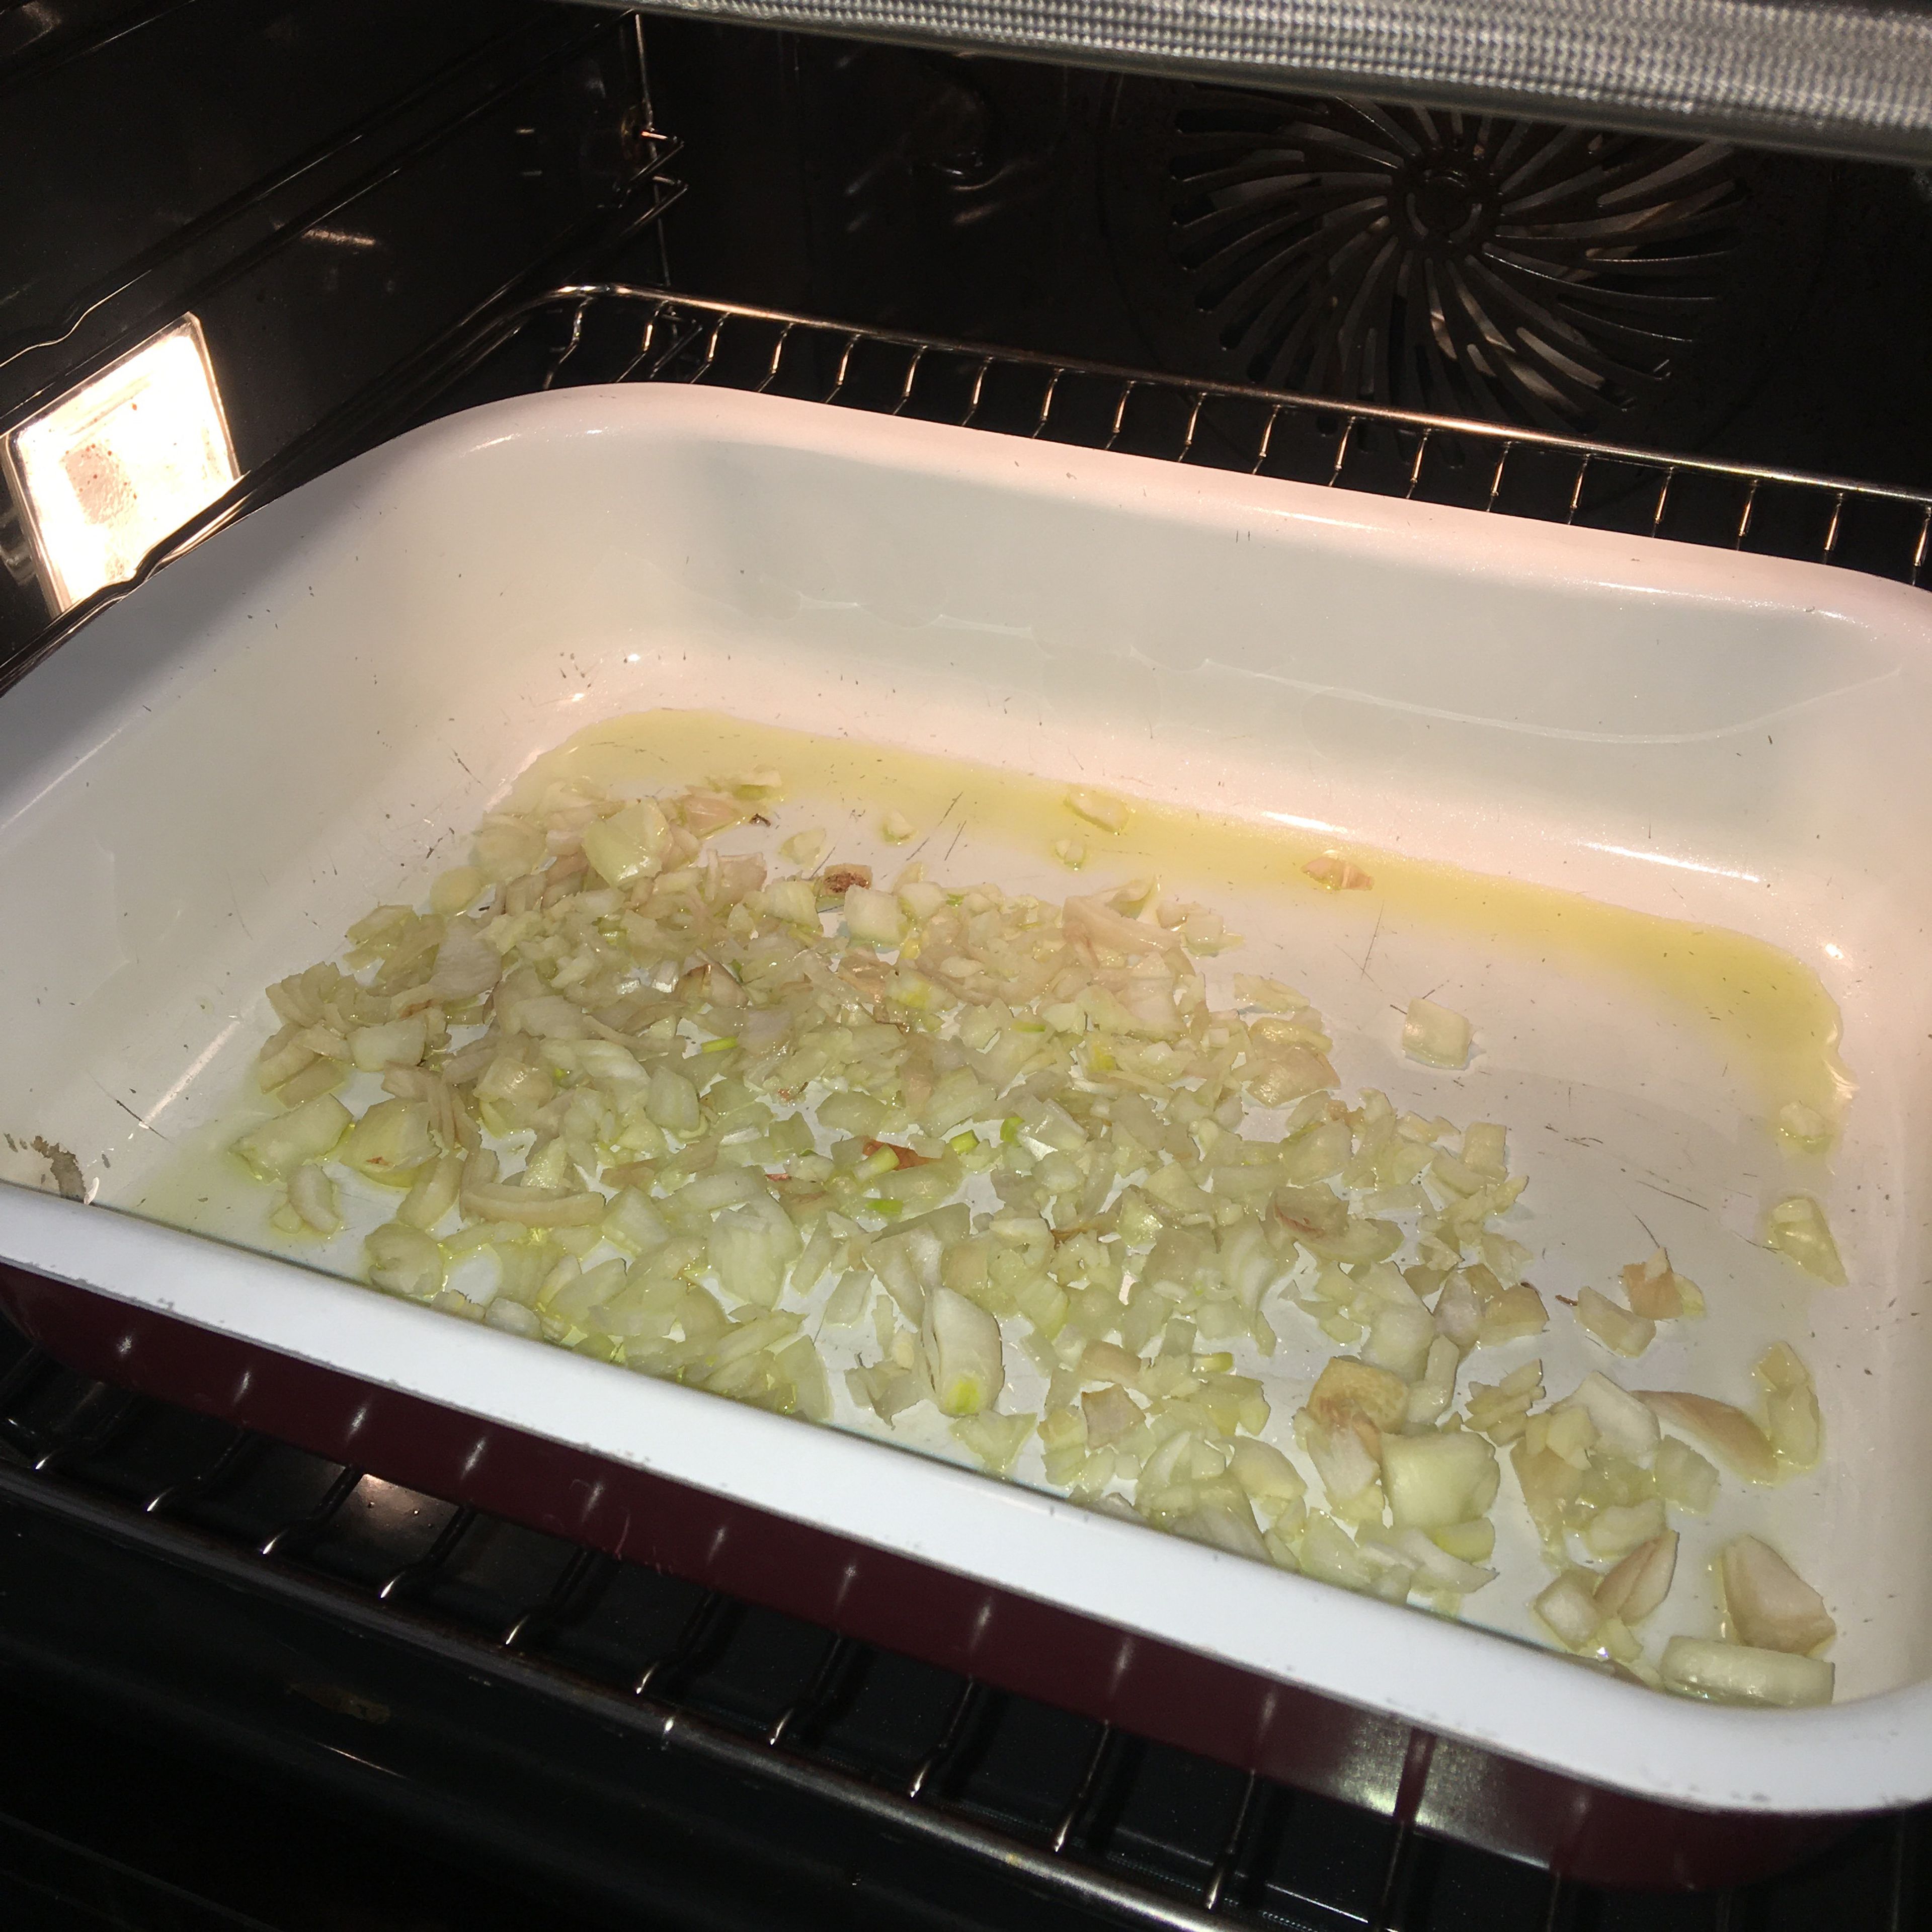 Add olive oil to a deep baking dish or a casserole. Then add the chopped and minced onion and garlic to it. Pop it in the oven for 3-5 mins or until brown and translucent. Be careful not to burn the garlic.